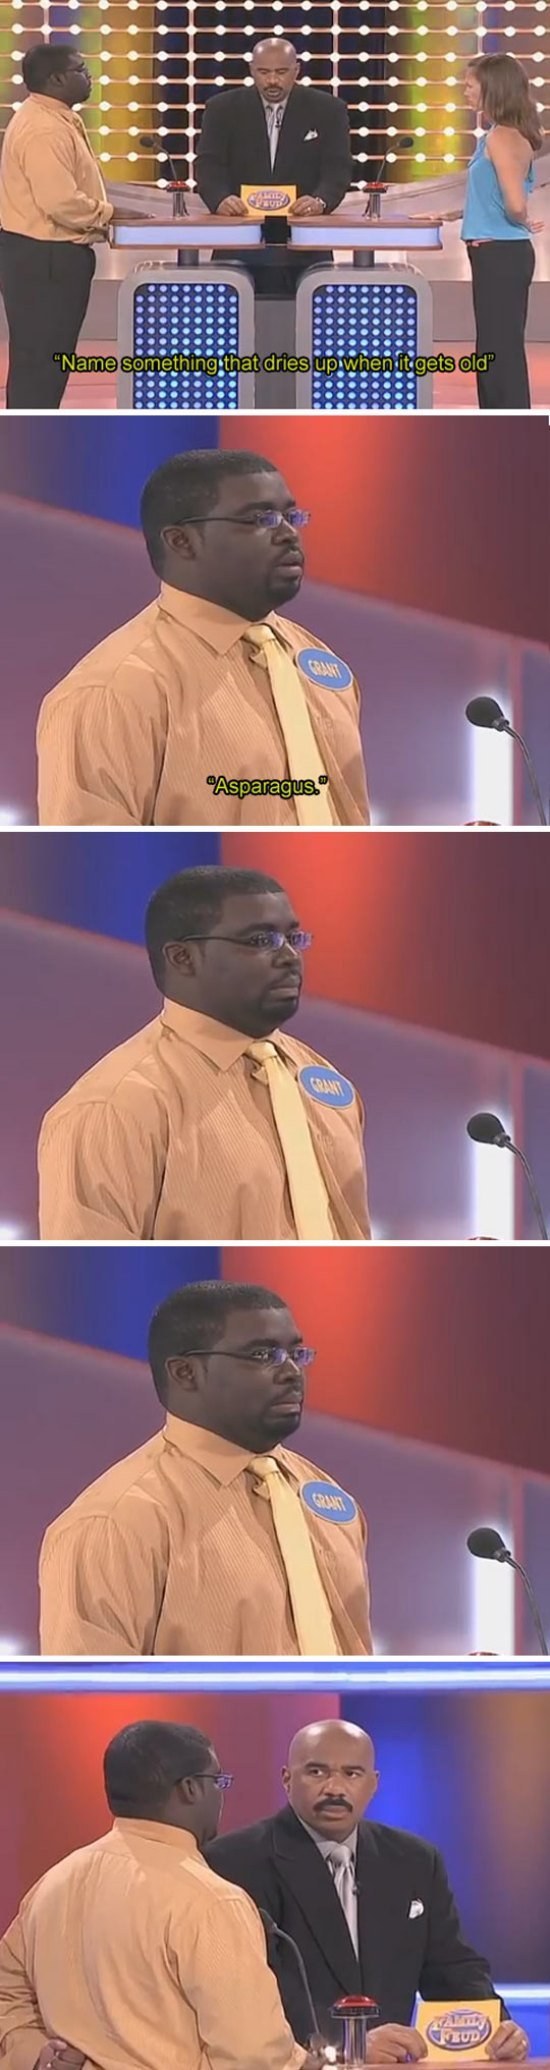 The moment when even the contestant knew he had failed.